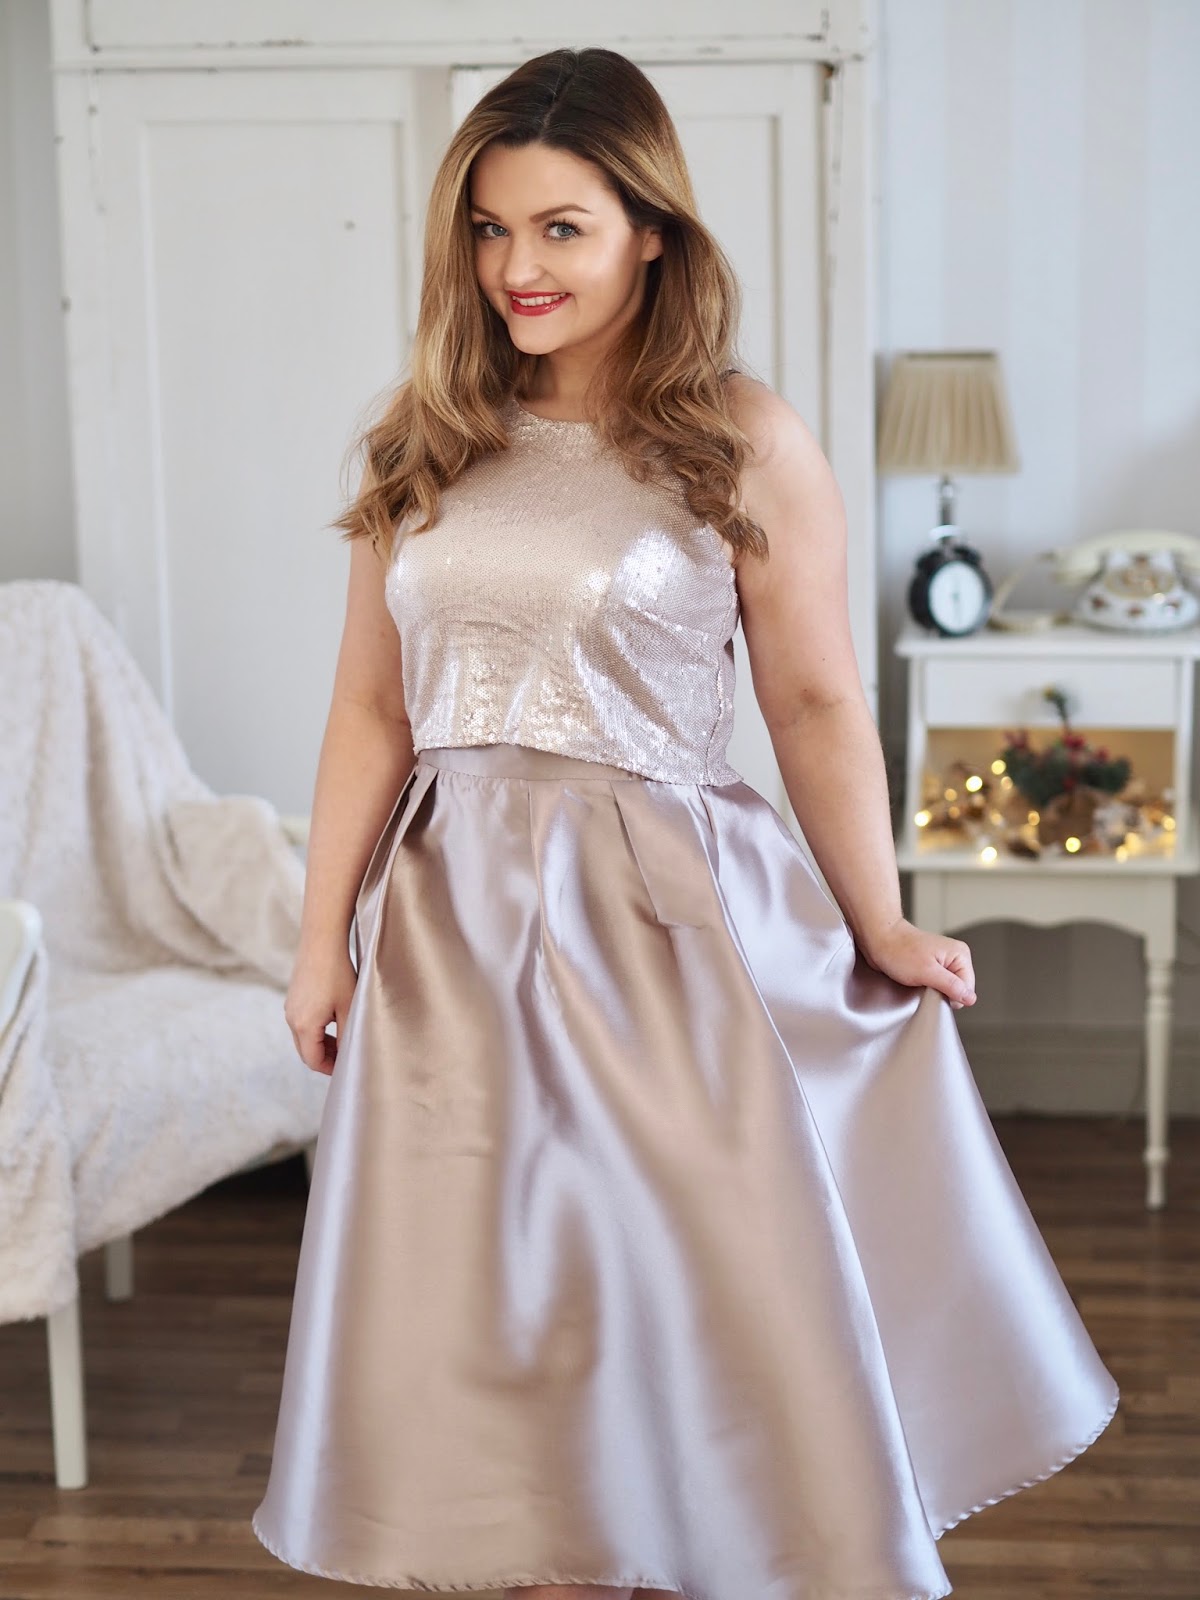 Christmas party dresses with @mykindofdress | The dainty dress diaries